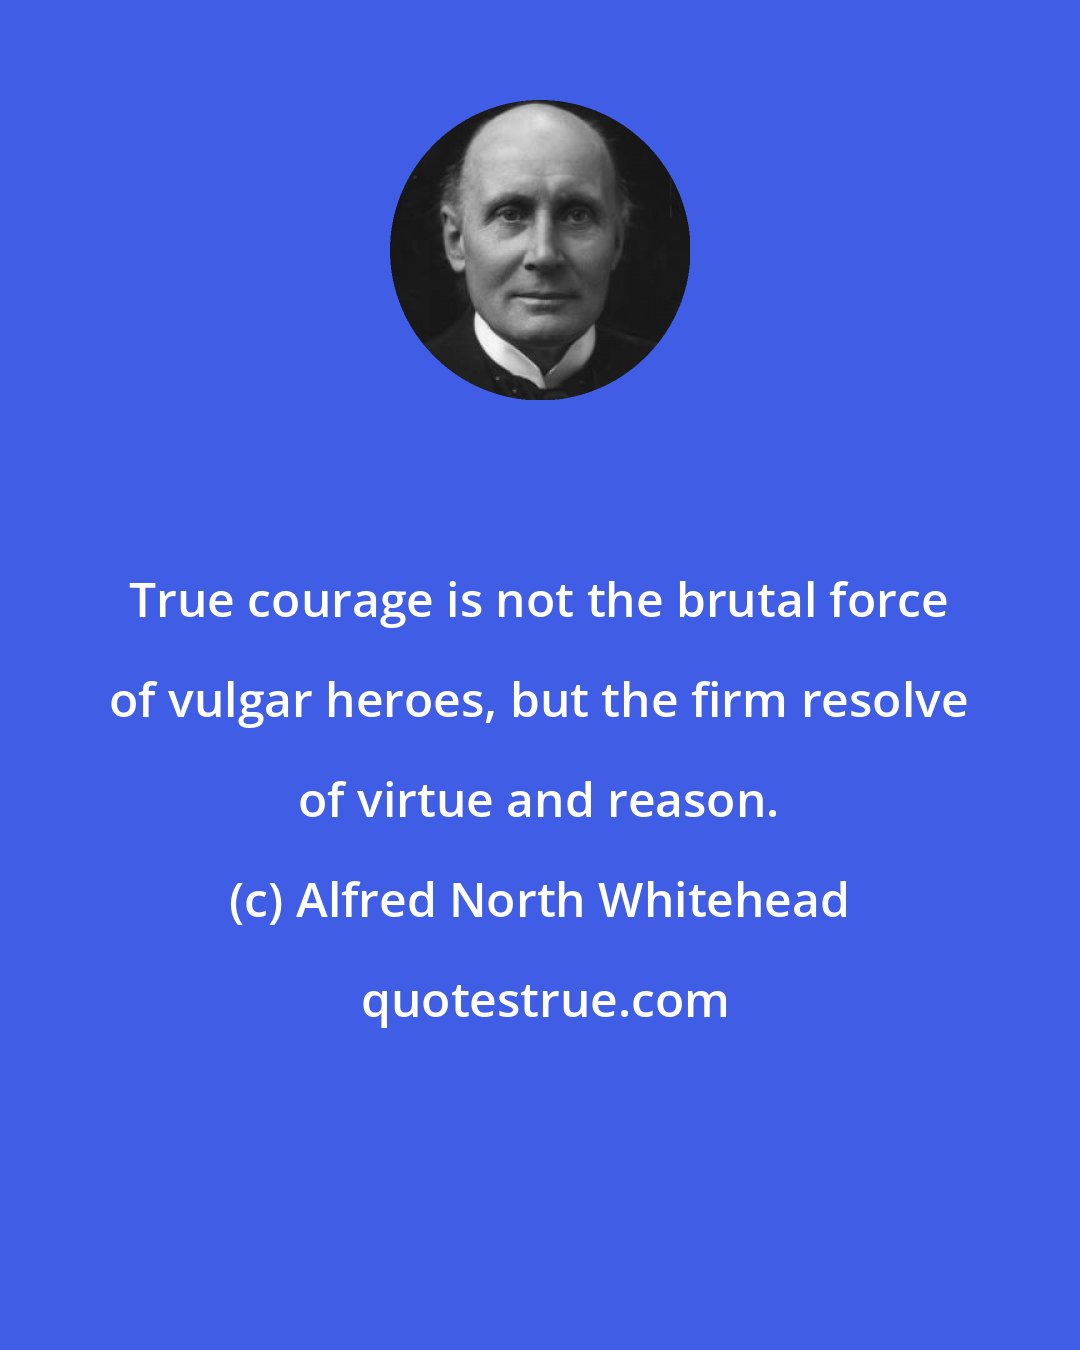 Alfred North Whitehead: True courage is not the brutal force of vulgar heroes, but the firm resolve of virtue and reason.